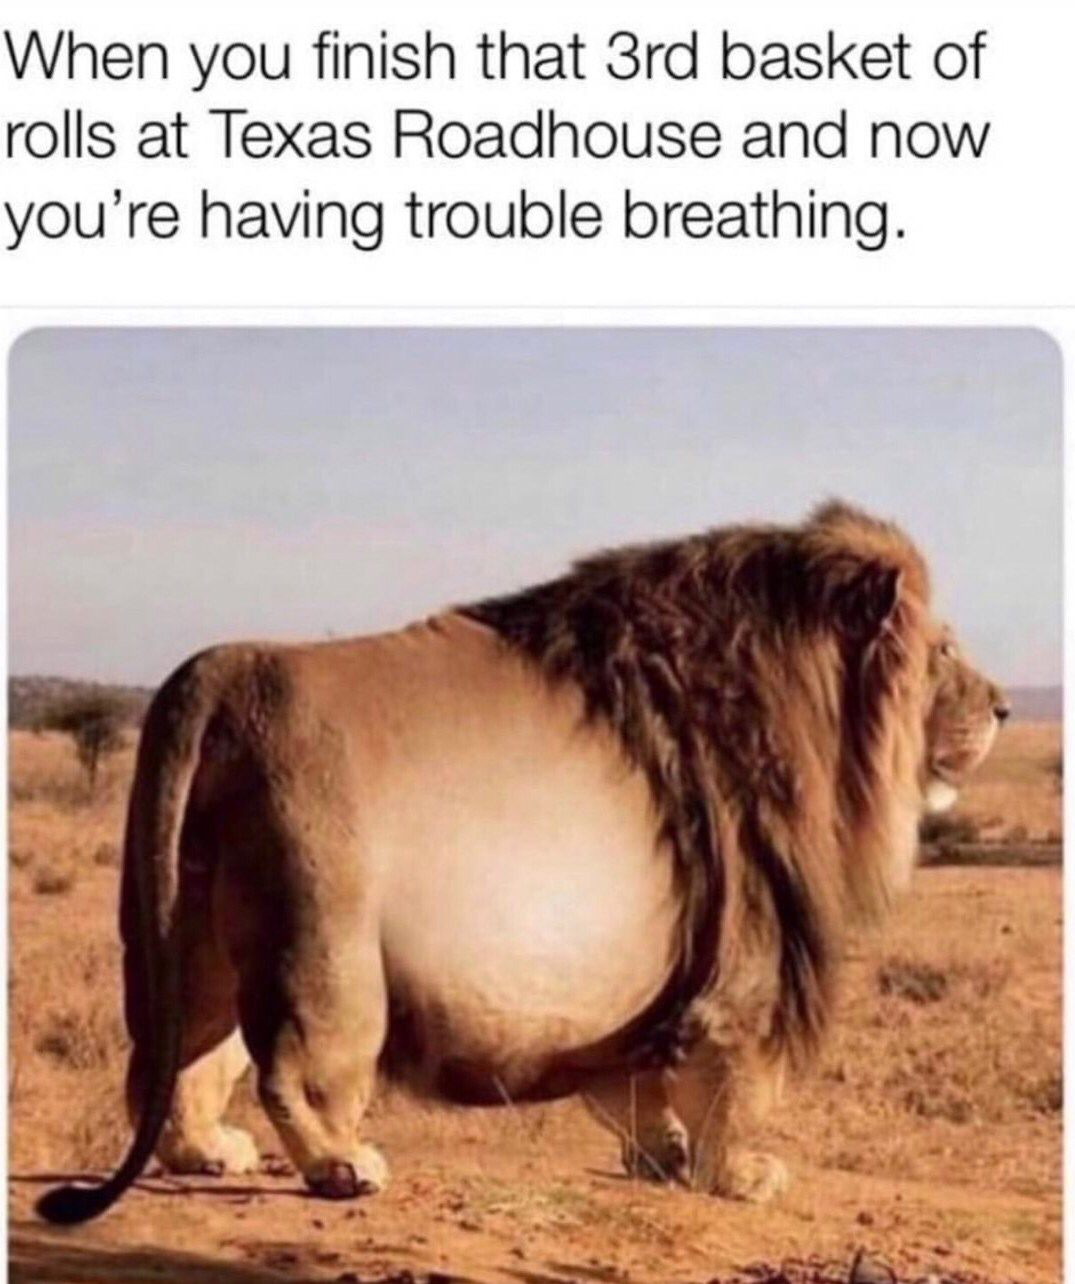 texas roadhouse meme - When you finish that 3rd basket of rolls at Texas Roadhouse and now you're having trouble breathing.